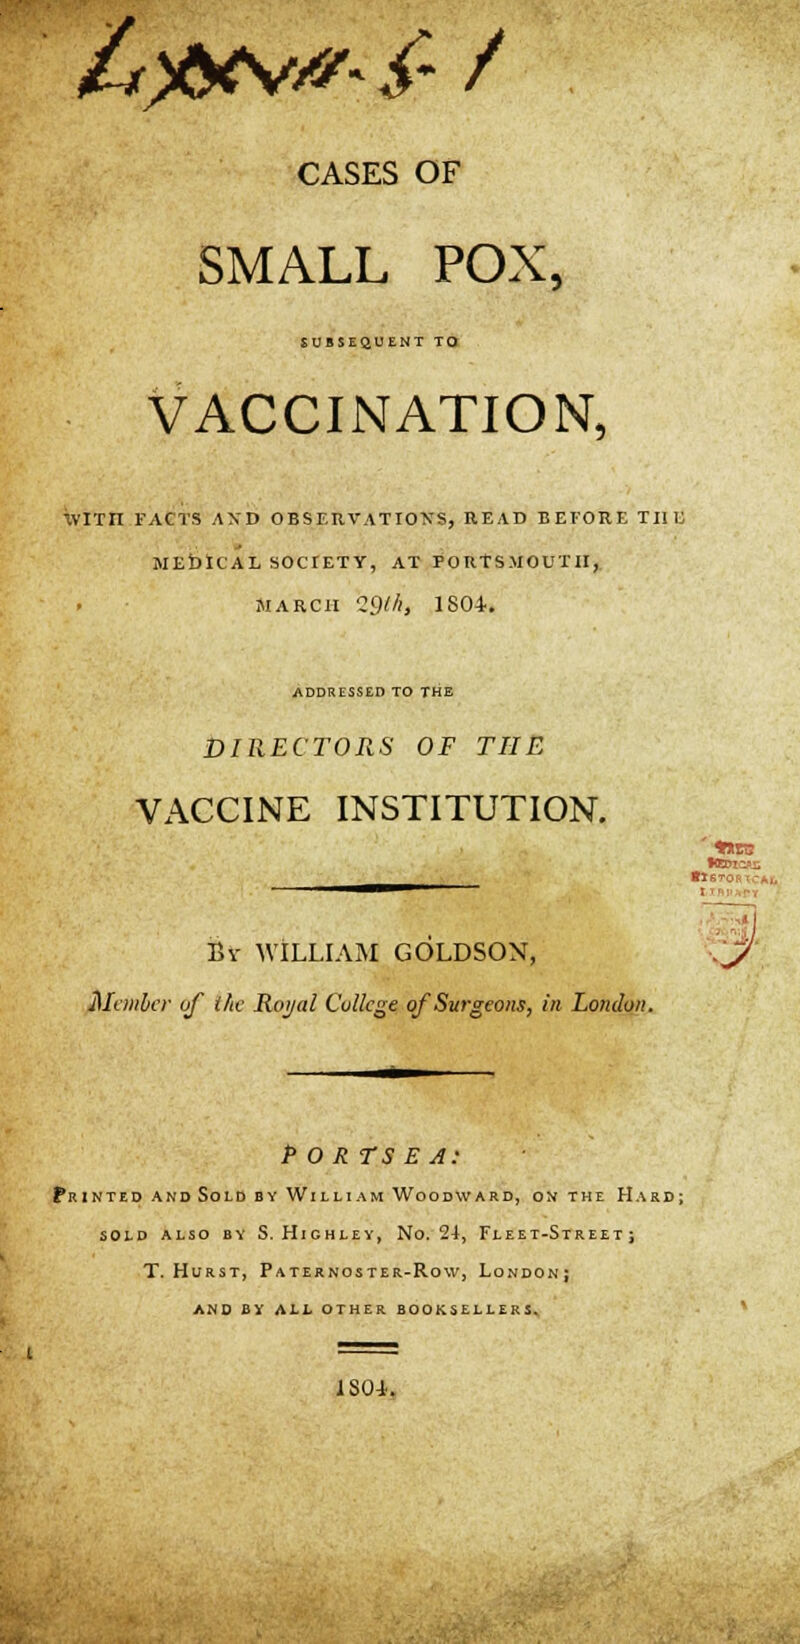 &)&vtf- £ / CASES OF SMALL POX, SUBSEQUENT TO VACCINATION, WtTH FACTS AND OBSERVATION'S, read before the MEDICAL SOCIETY, AT PORTSMOUTH, MARCH 29th, ISO*. ADDRESSED TO THE DIRECTORS OF THE VACCINE INSTITUTION. Una: •lSTORirt By WILLIAM GOLDSON, Member of the Roj/al College of Surgeons, in London. P O RTS E A: Printed and Sold by William Woodward, on the Hard; SOLD ALSO BY S. HlCHLEY, No. 24, FLEE T-StR EET J T. Hurst, Paternoster-Row, London; AND II ALL OTHER BOOKSELLERS. 1S01.